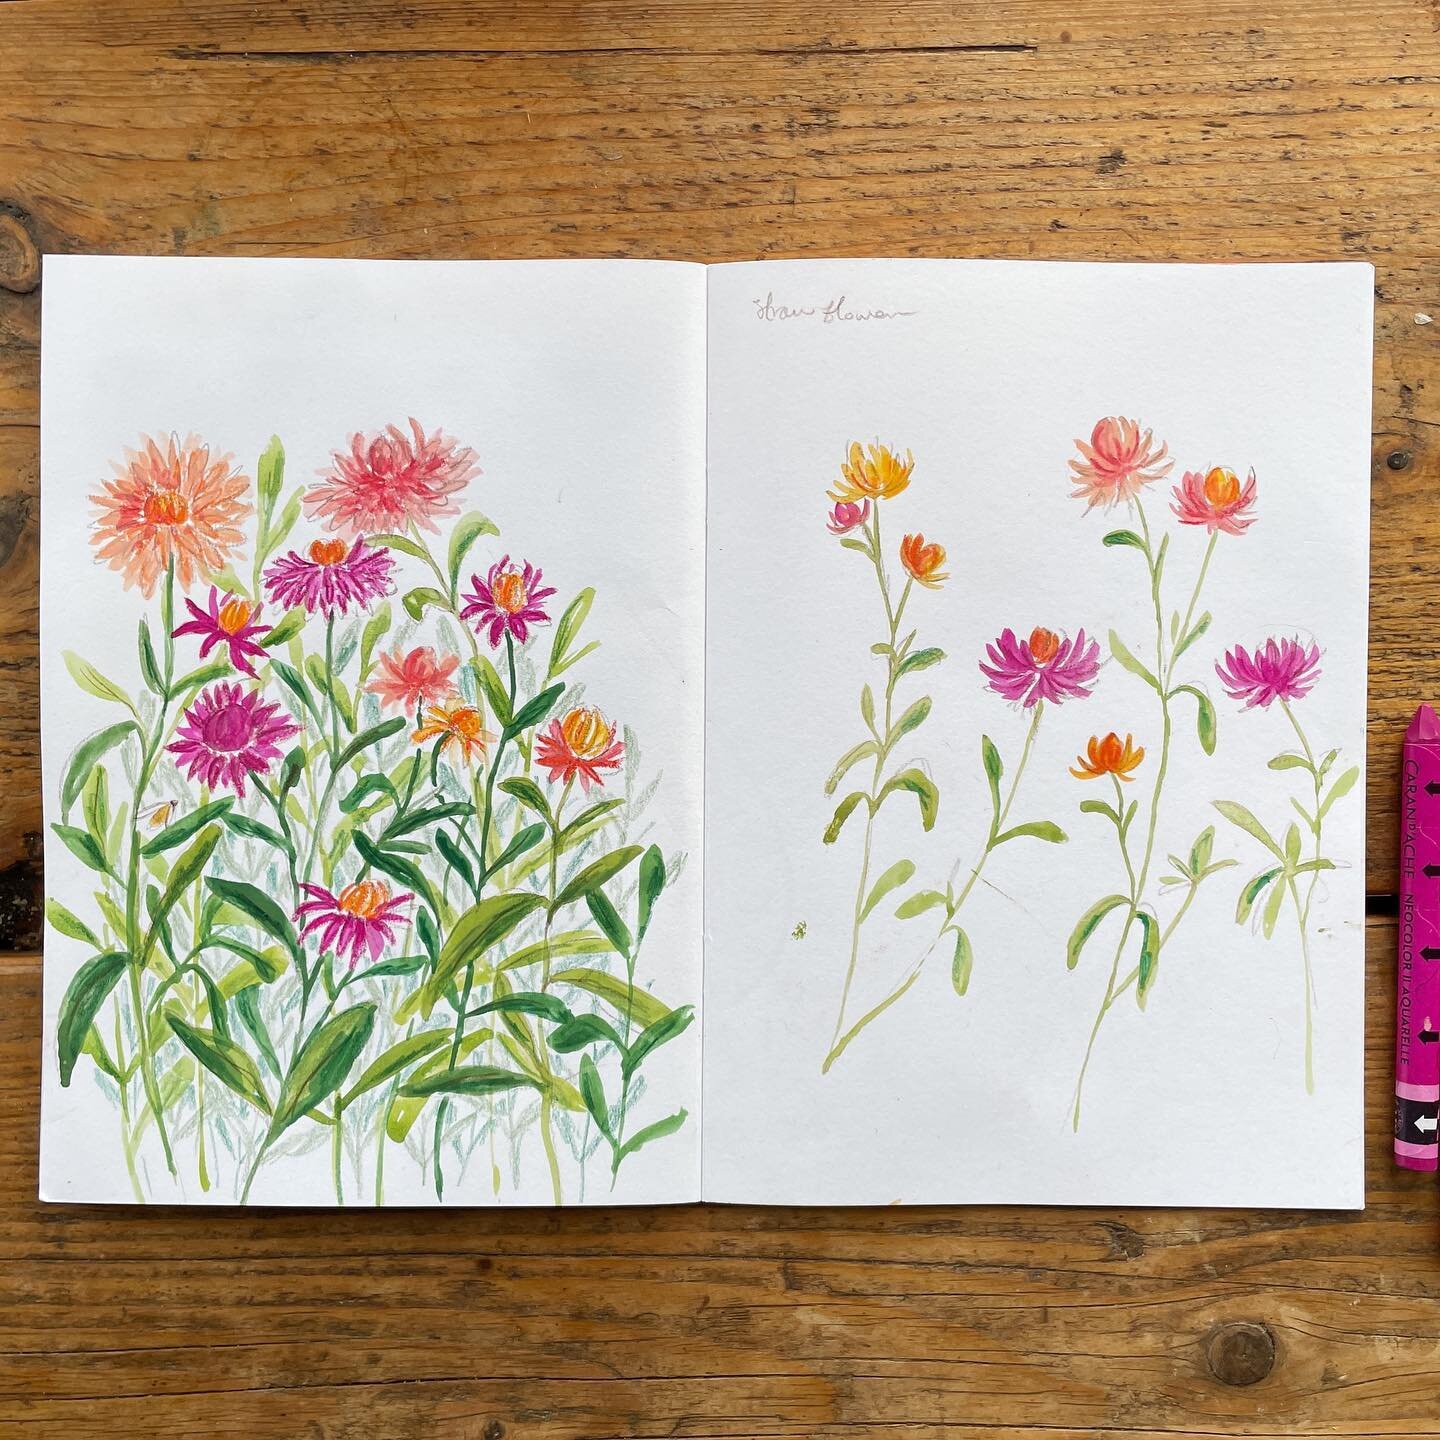 Gouache Techniques for Sketchbook Illustration - A course by Emma Block on  Vimeo